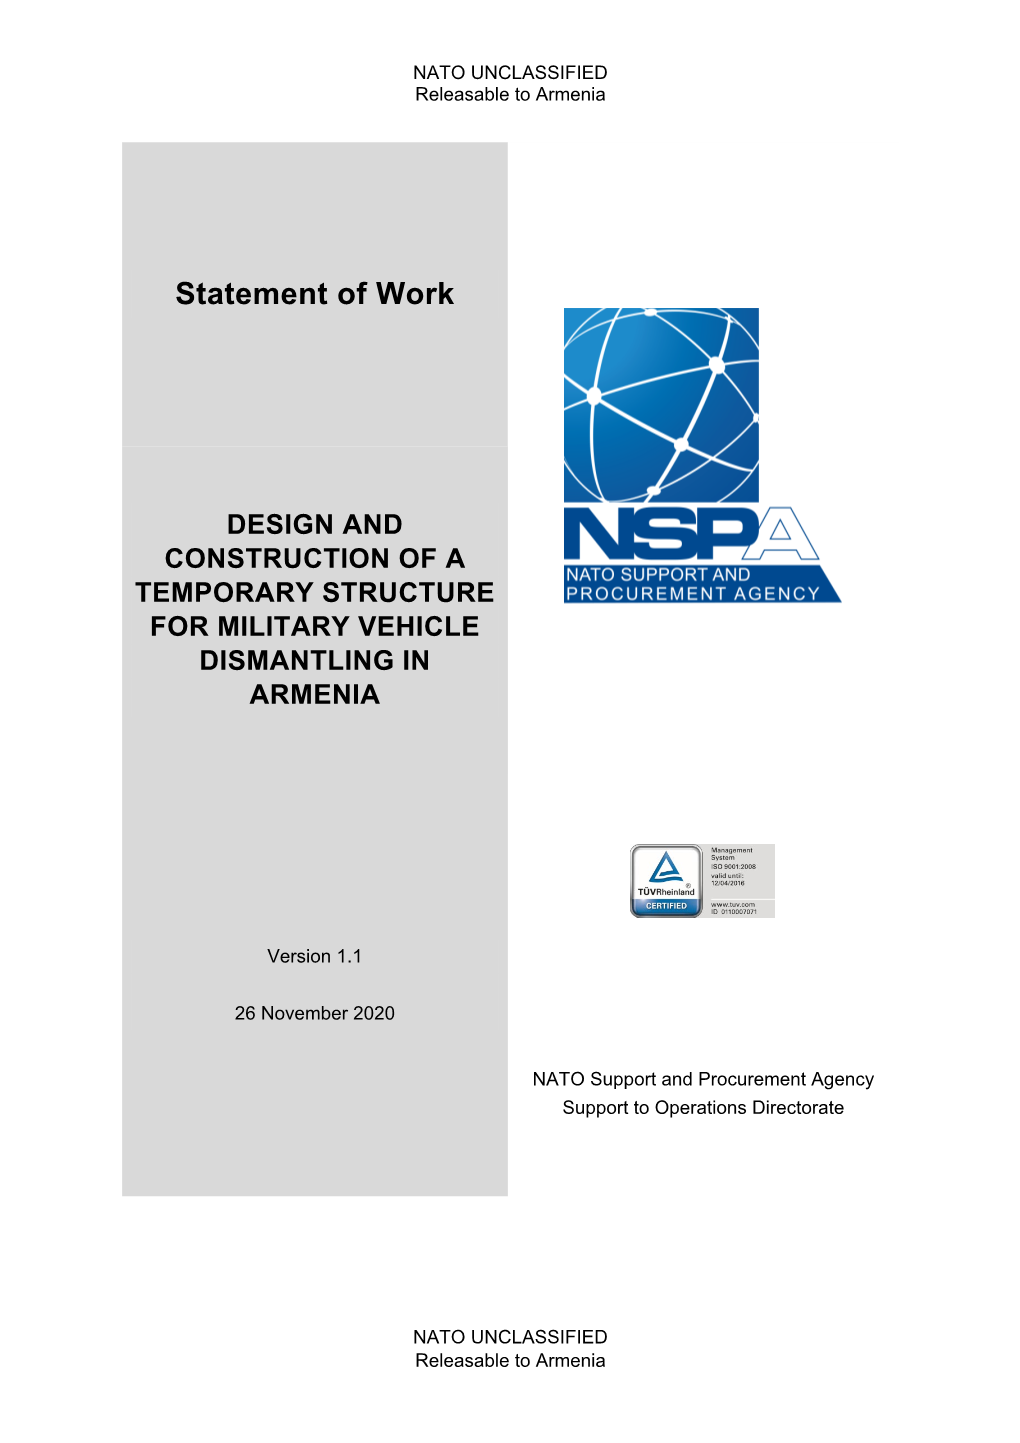 Statement of Work for the Construction of an Temporary Structure For